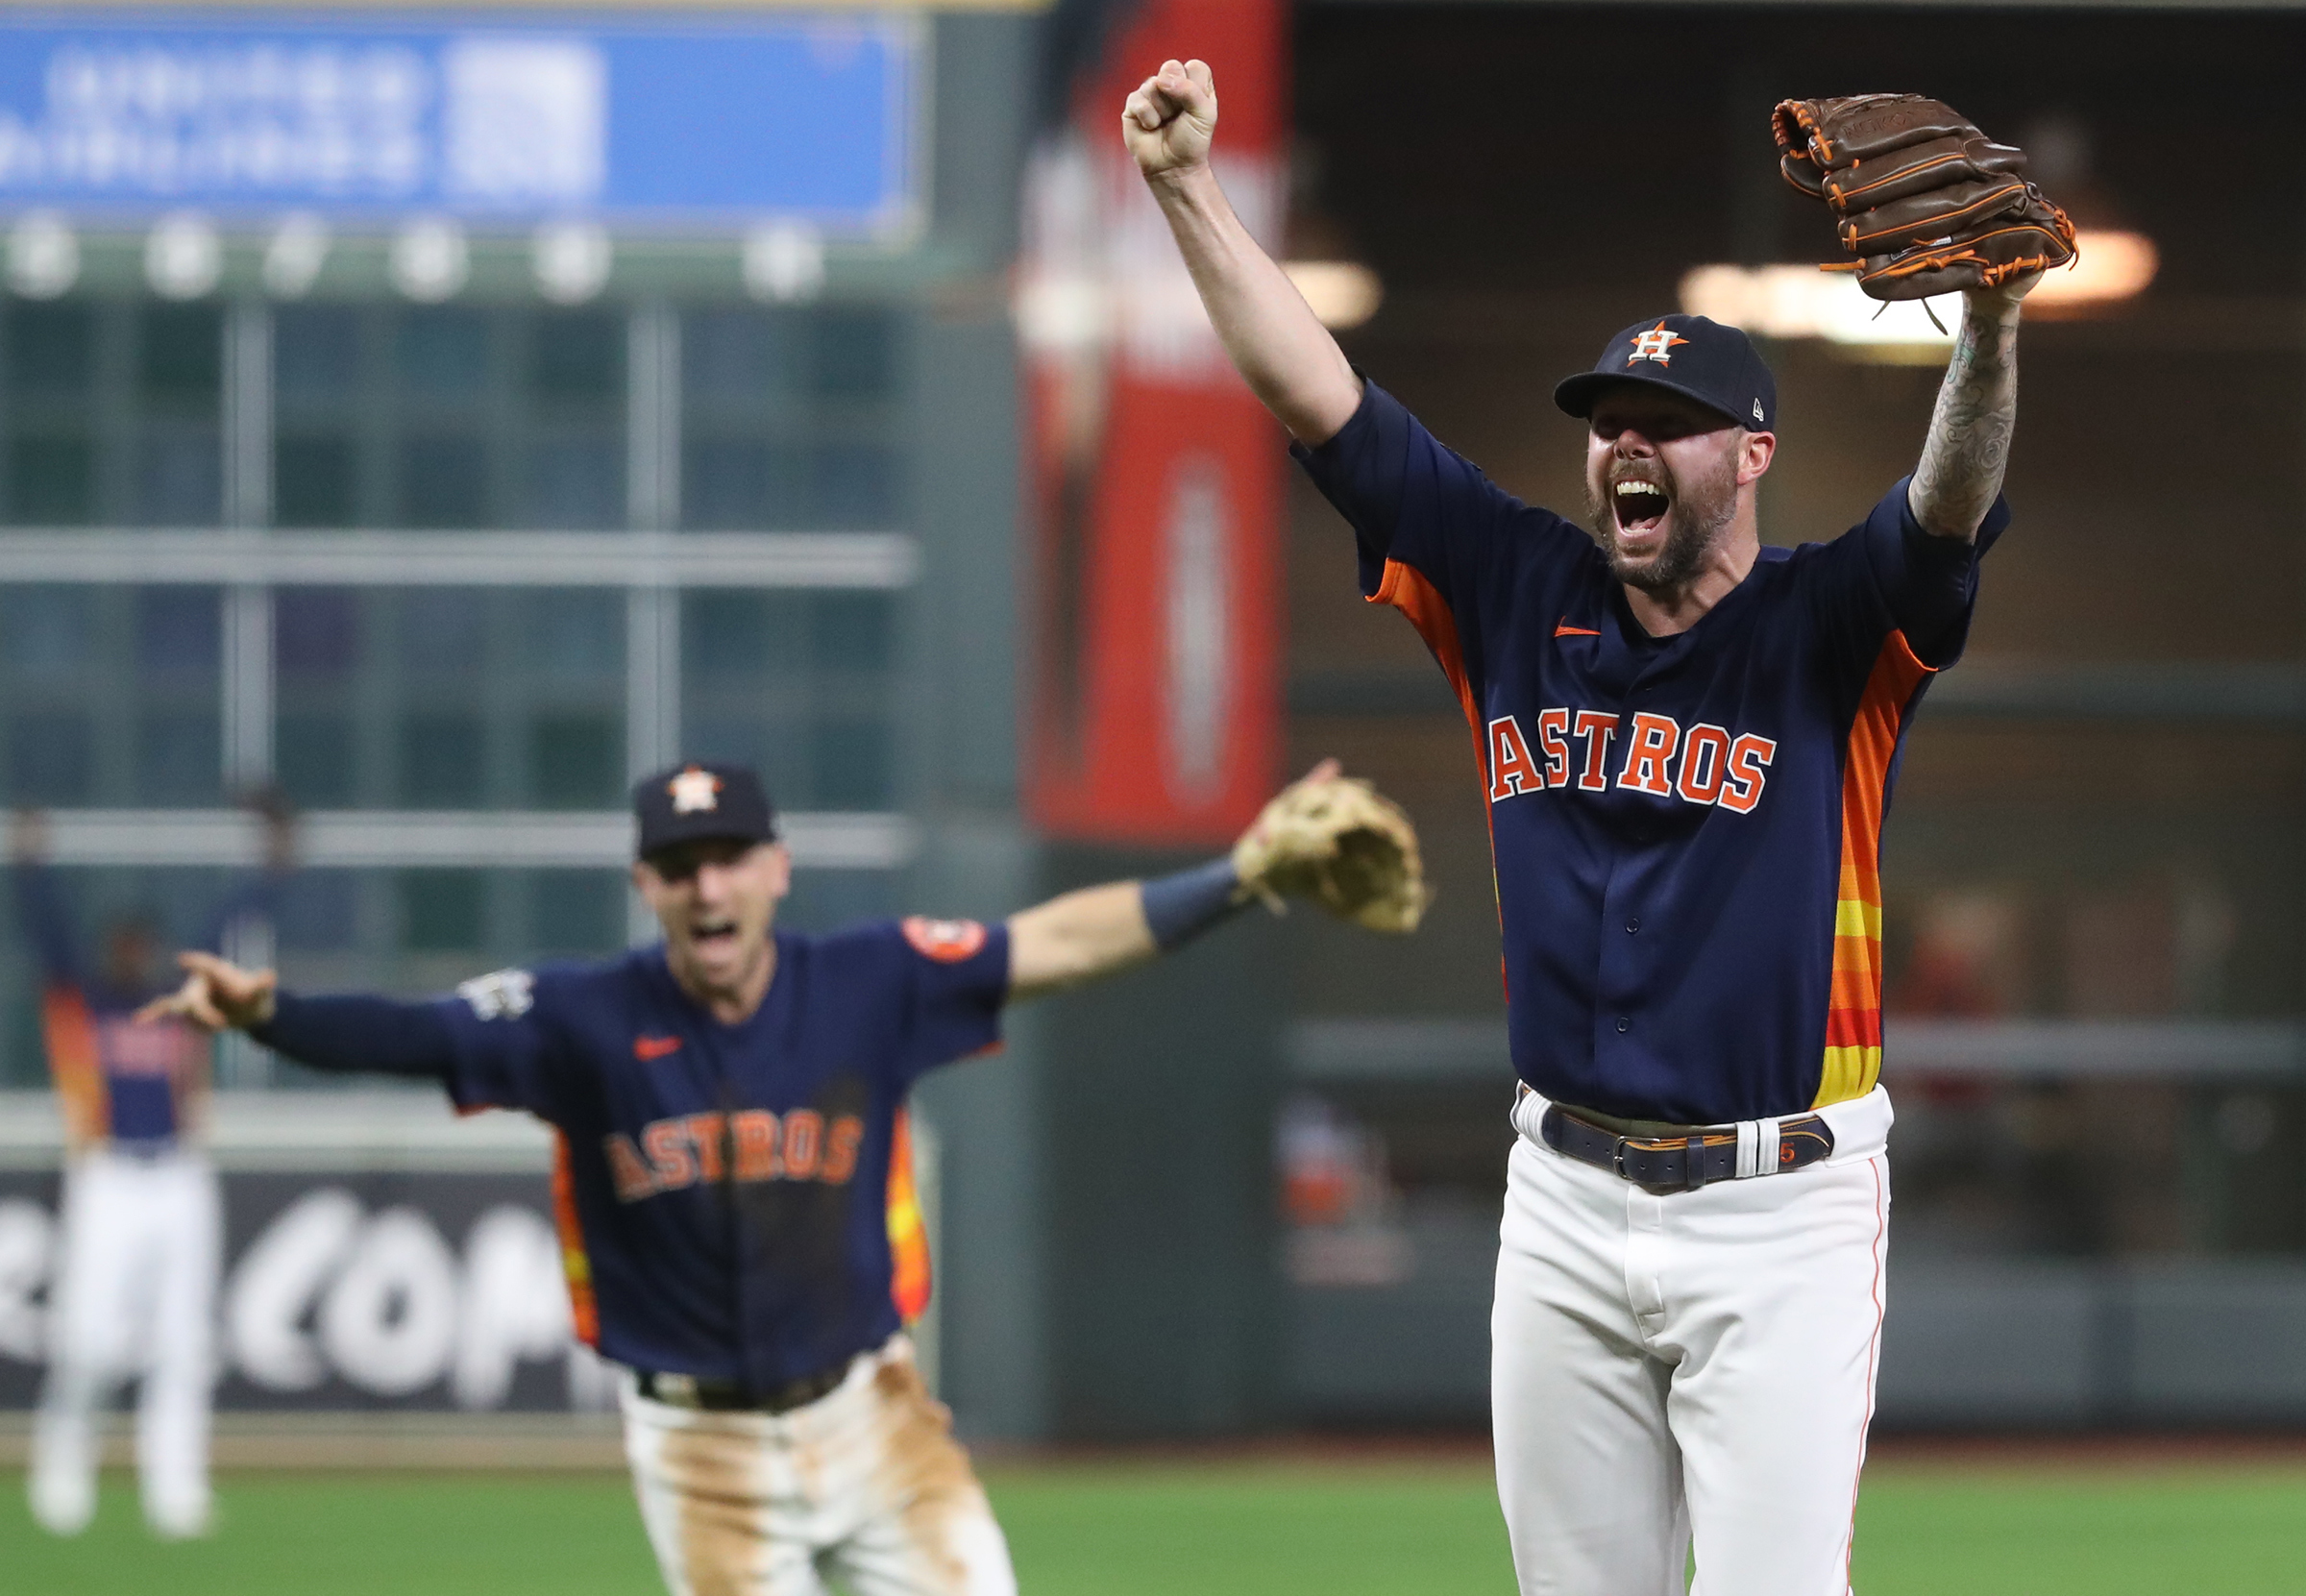 Astros win World Series over Phillies: Score, highlights